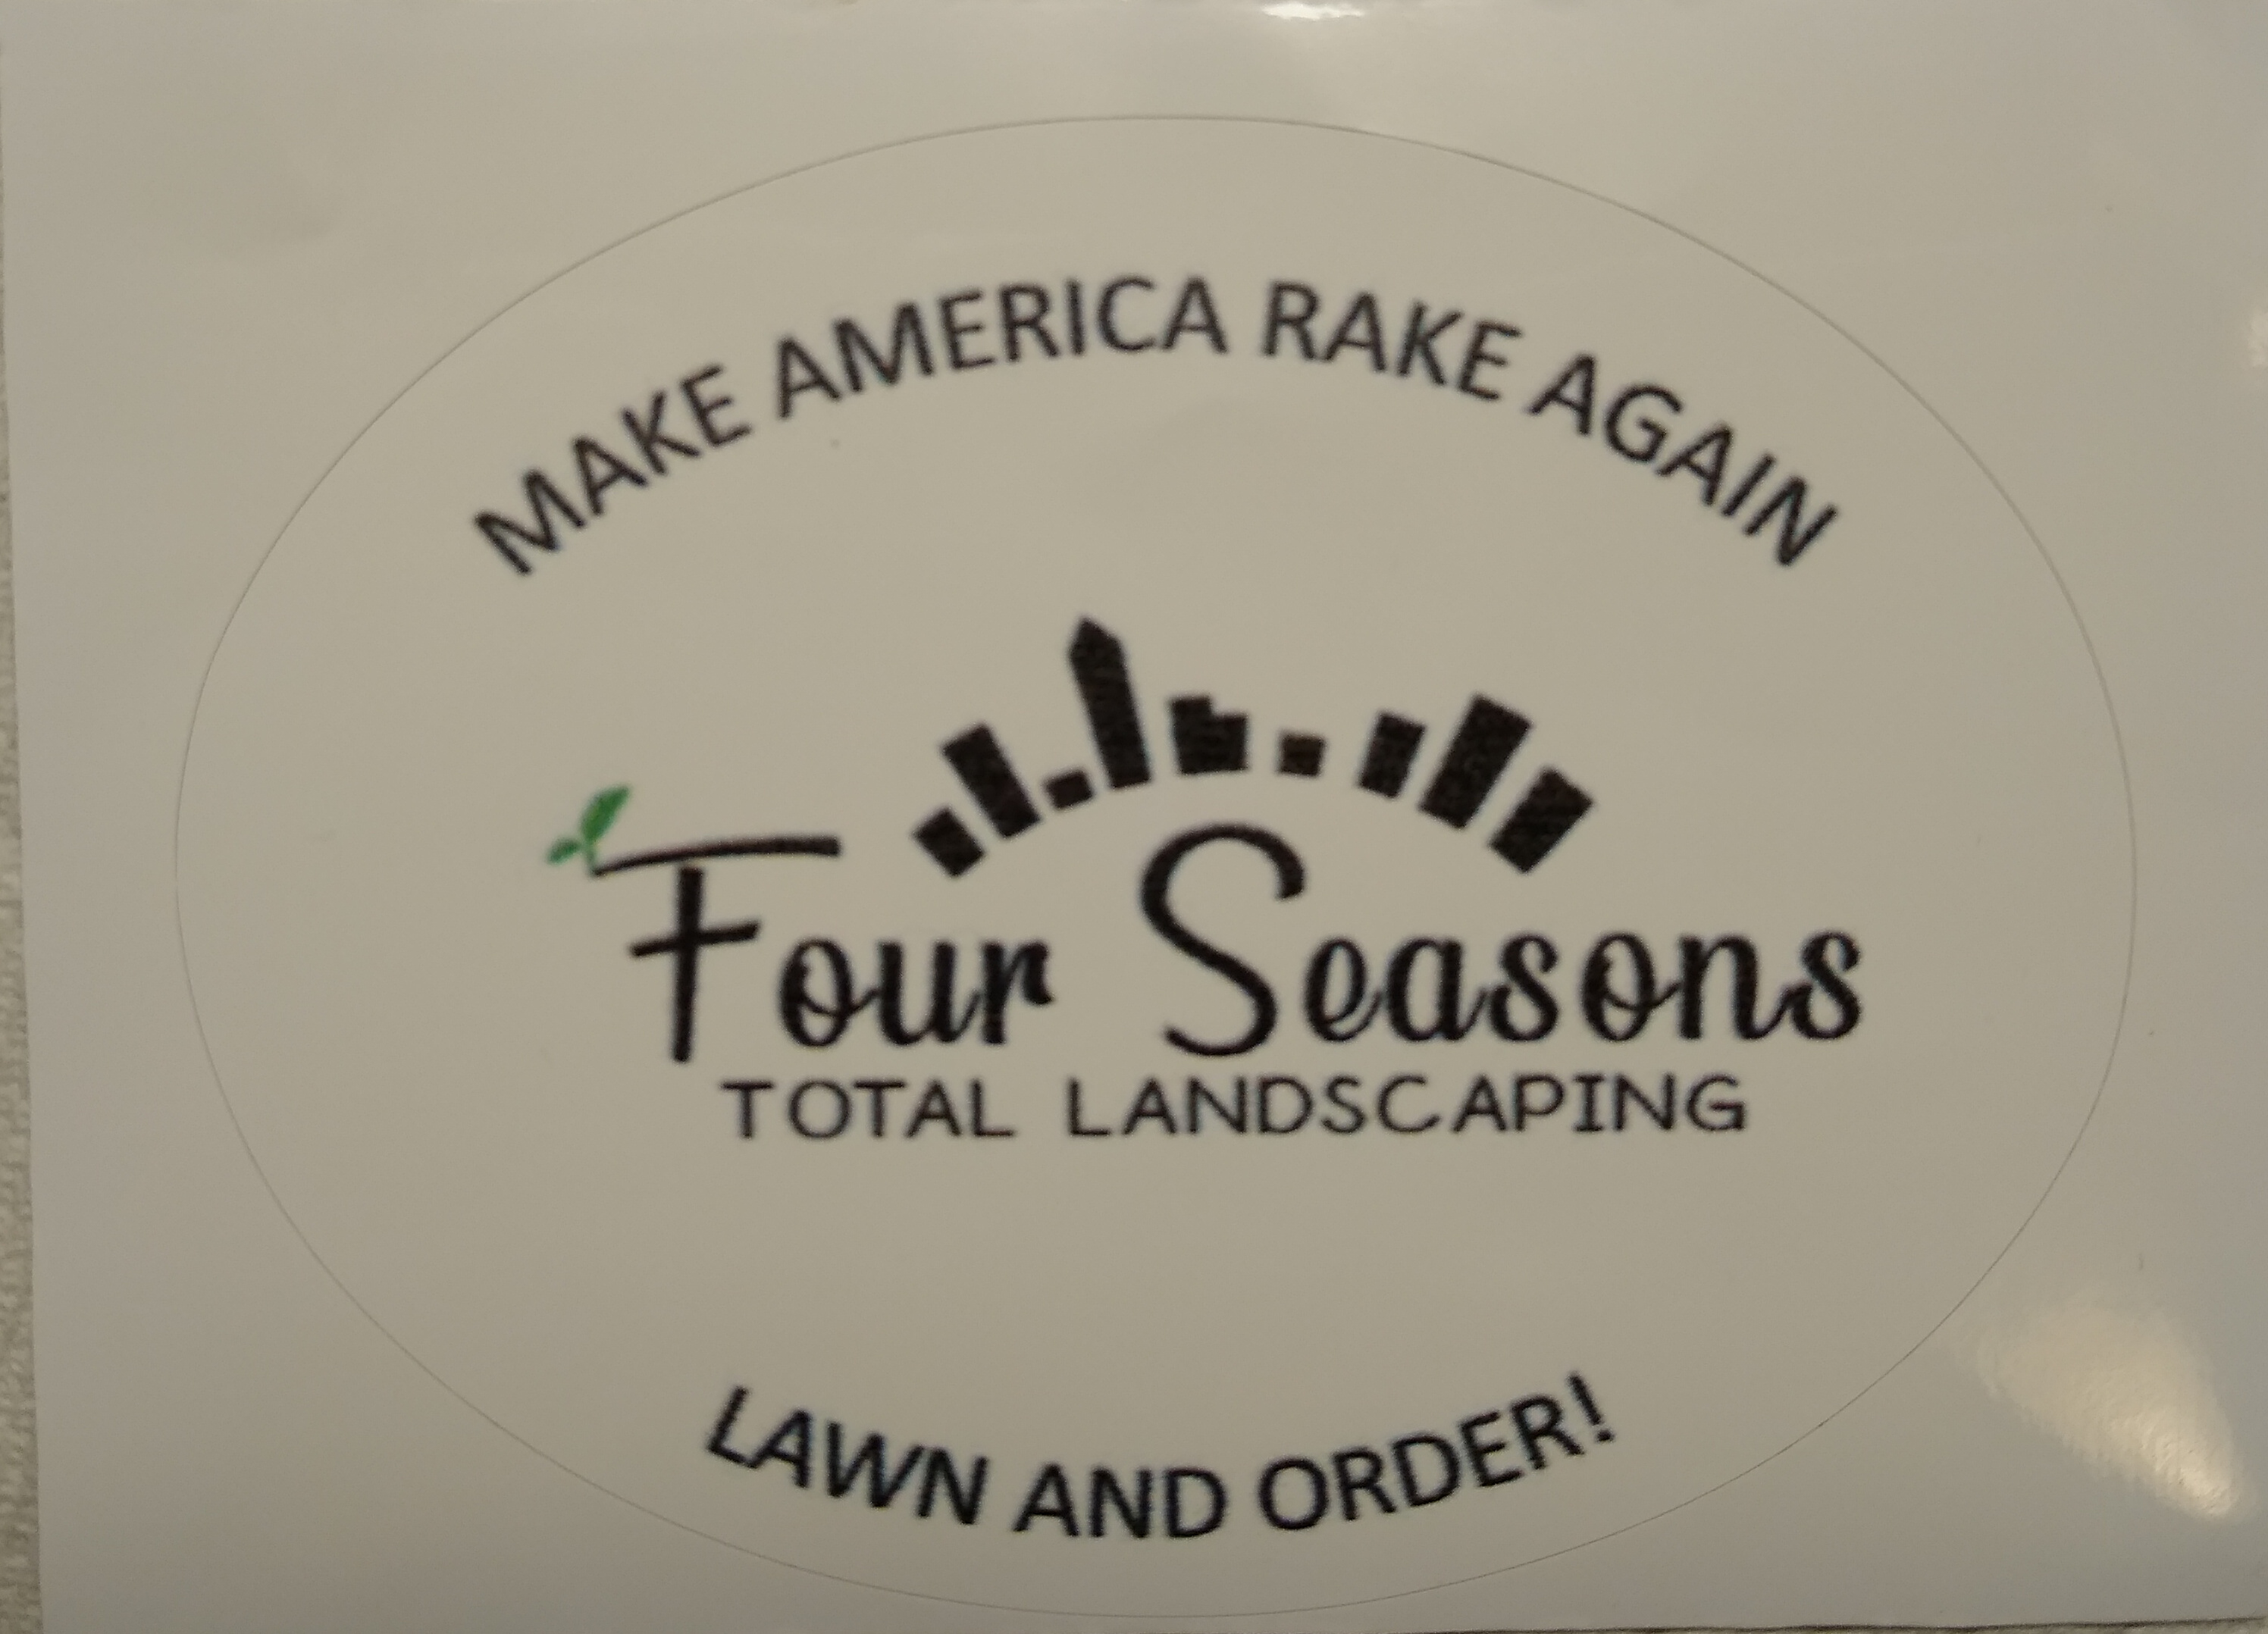 4 Seasons Total Landscaping -- Lawn and Order